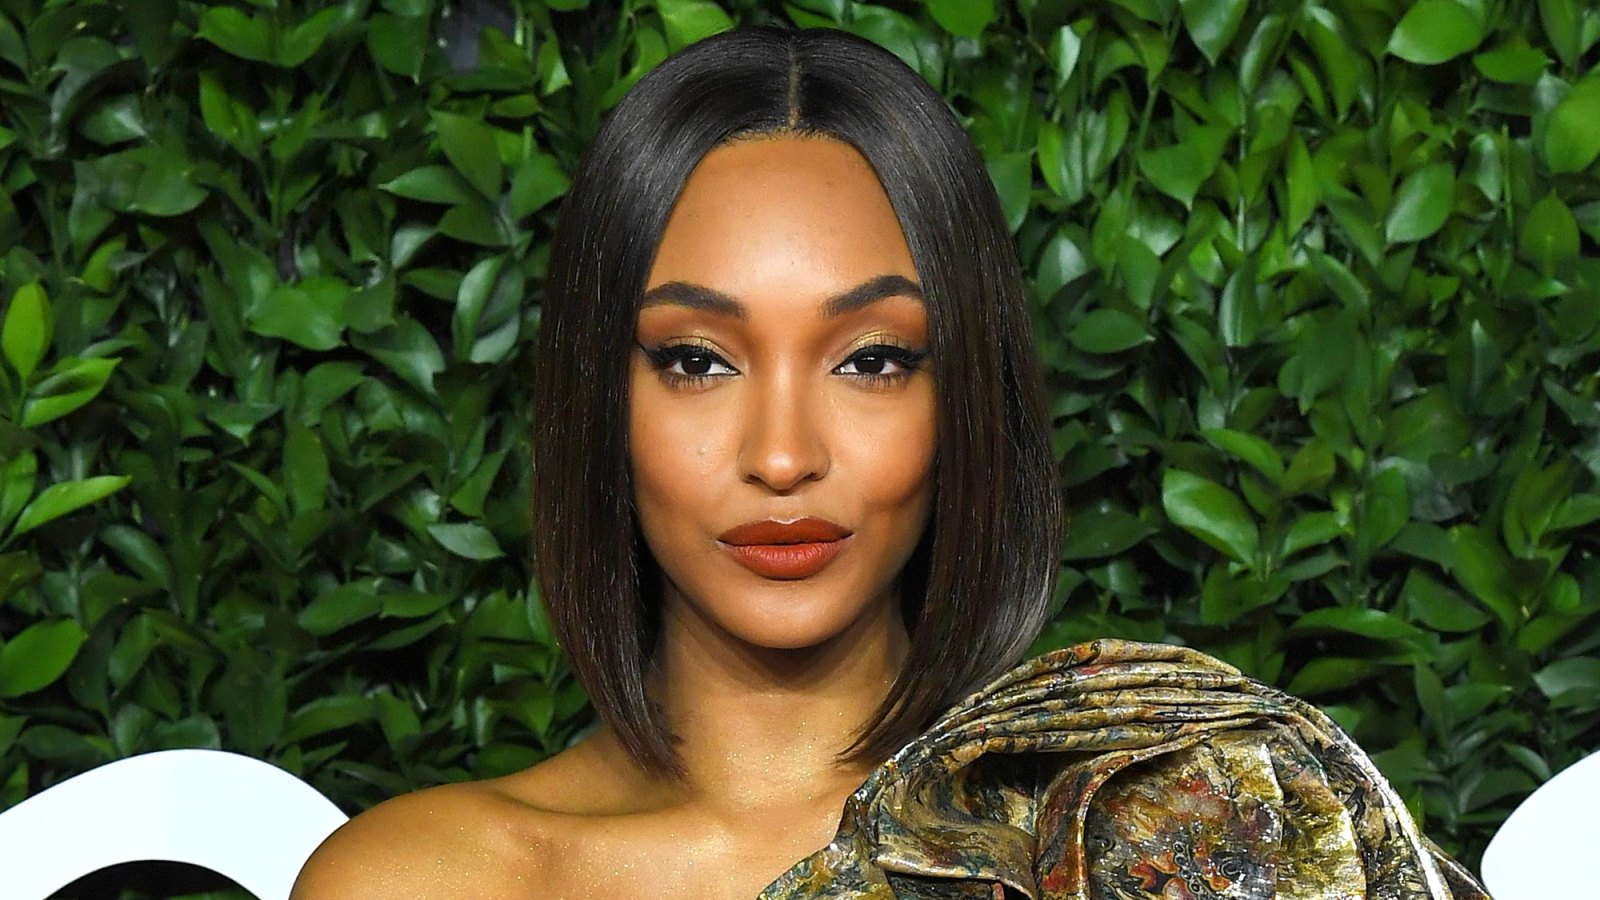 Jourdan Dunn Movies and TV Shows, Engaged, Son, Agency, Instagram - ABTC